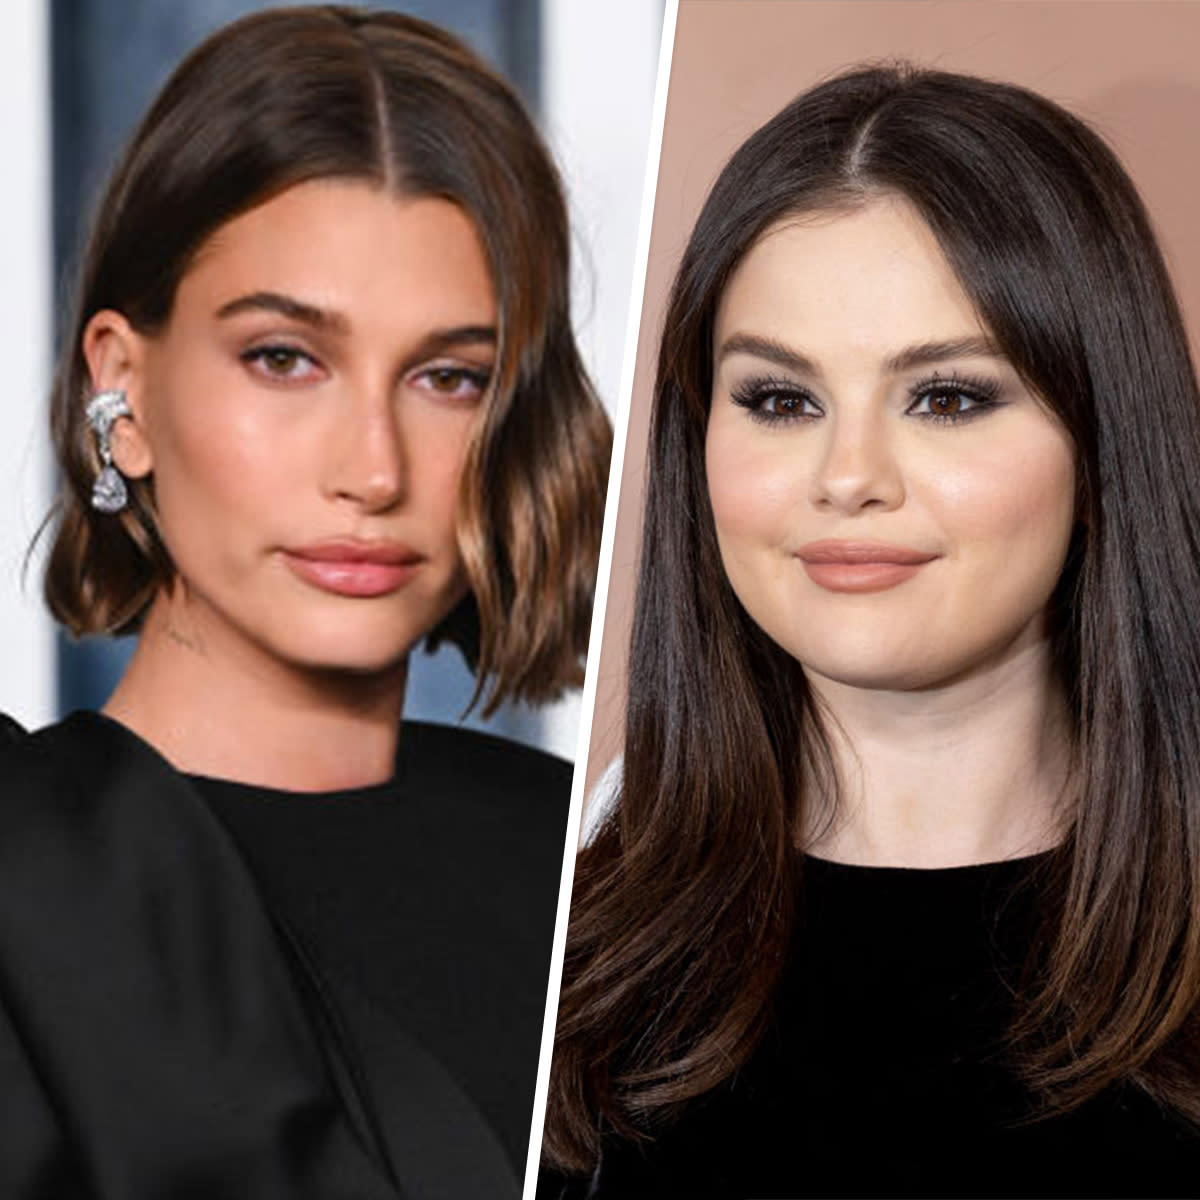 Hailey Bieber, left, thanked rumored rival Selena Gomez, right, for calling out fans who have harassed Bieber online. (Karwai Tang / Contributor / 	Emma McIntyre / Staff / Getty Images)